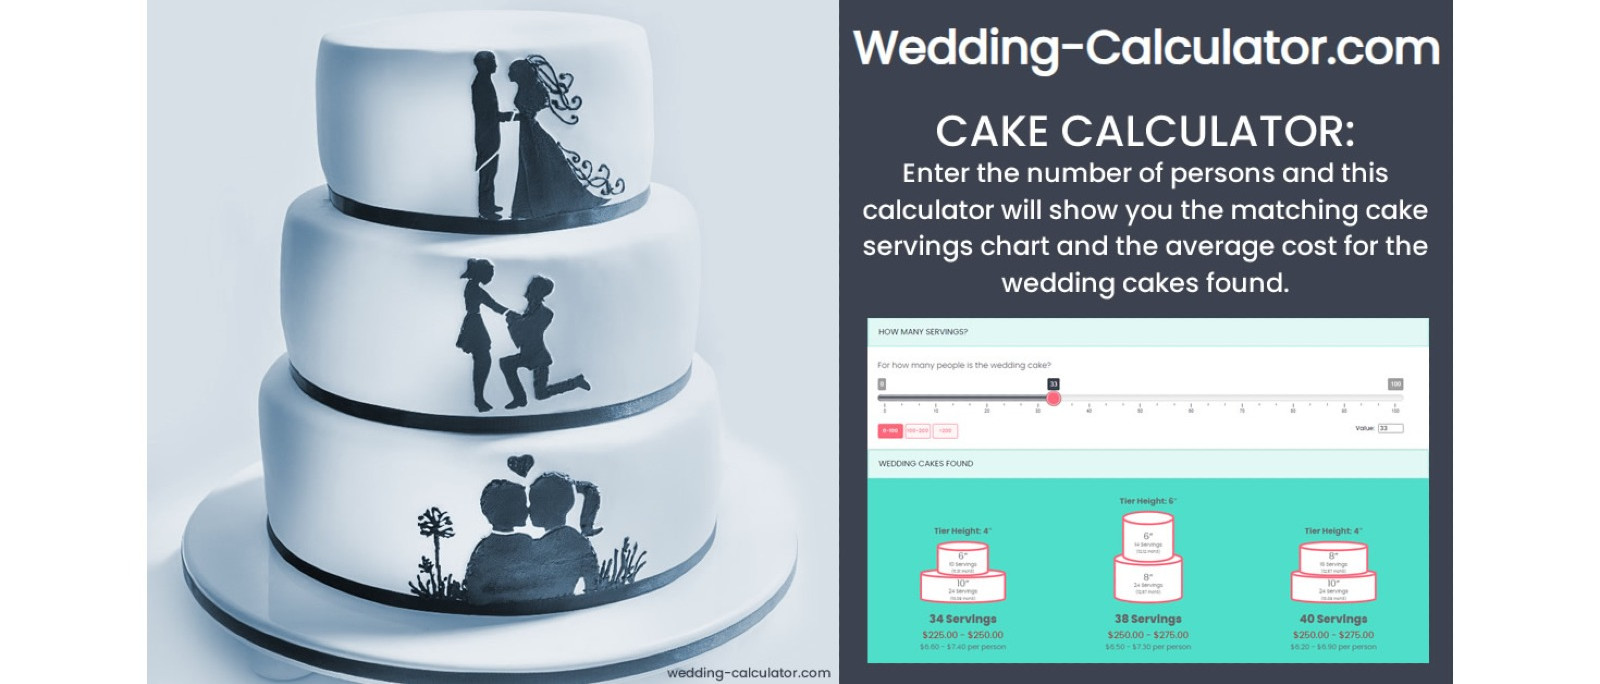 Want to see more wedding cakes? Use the wedding cake calculator